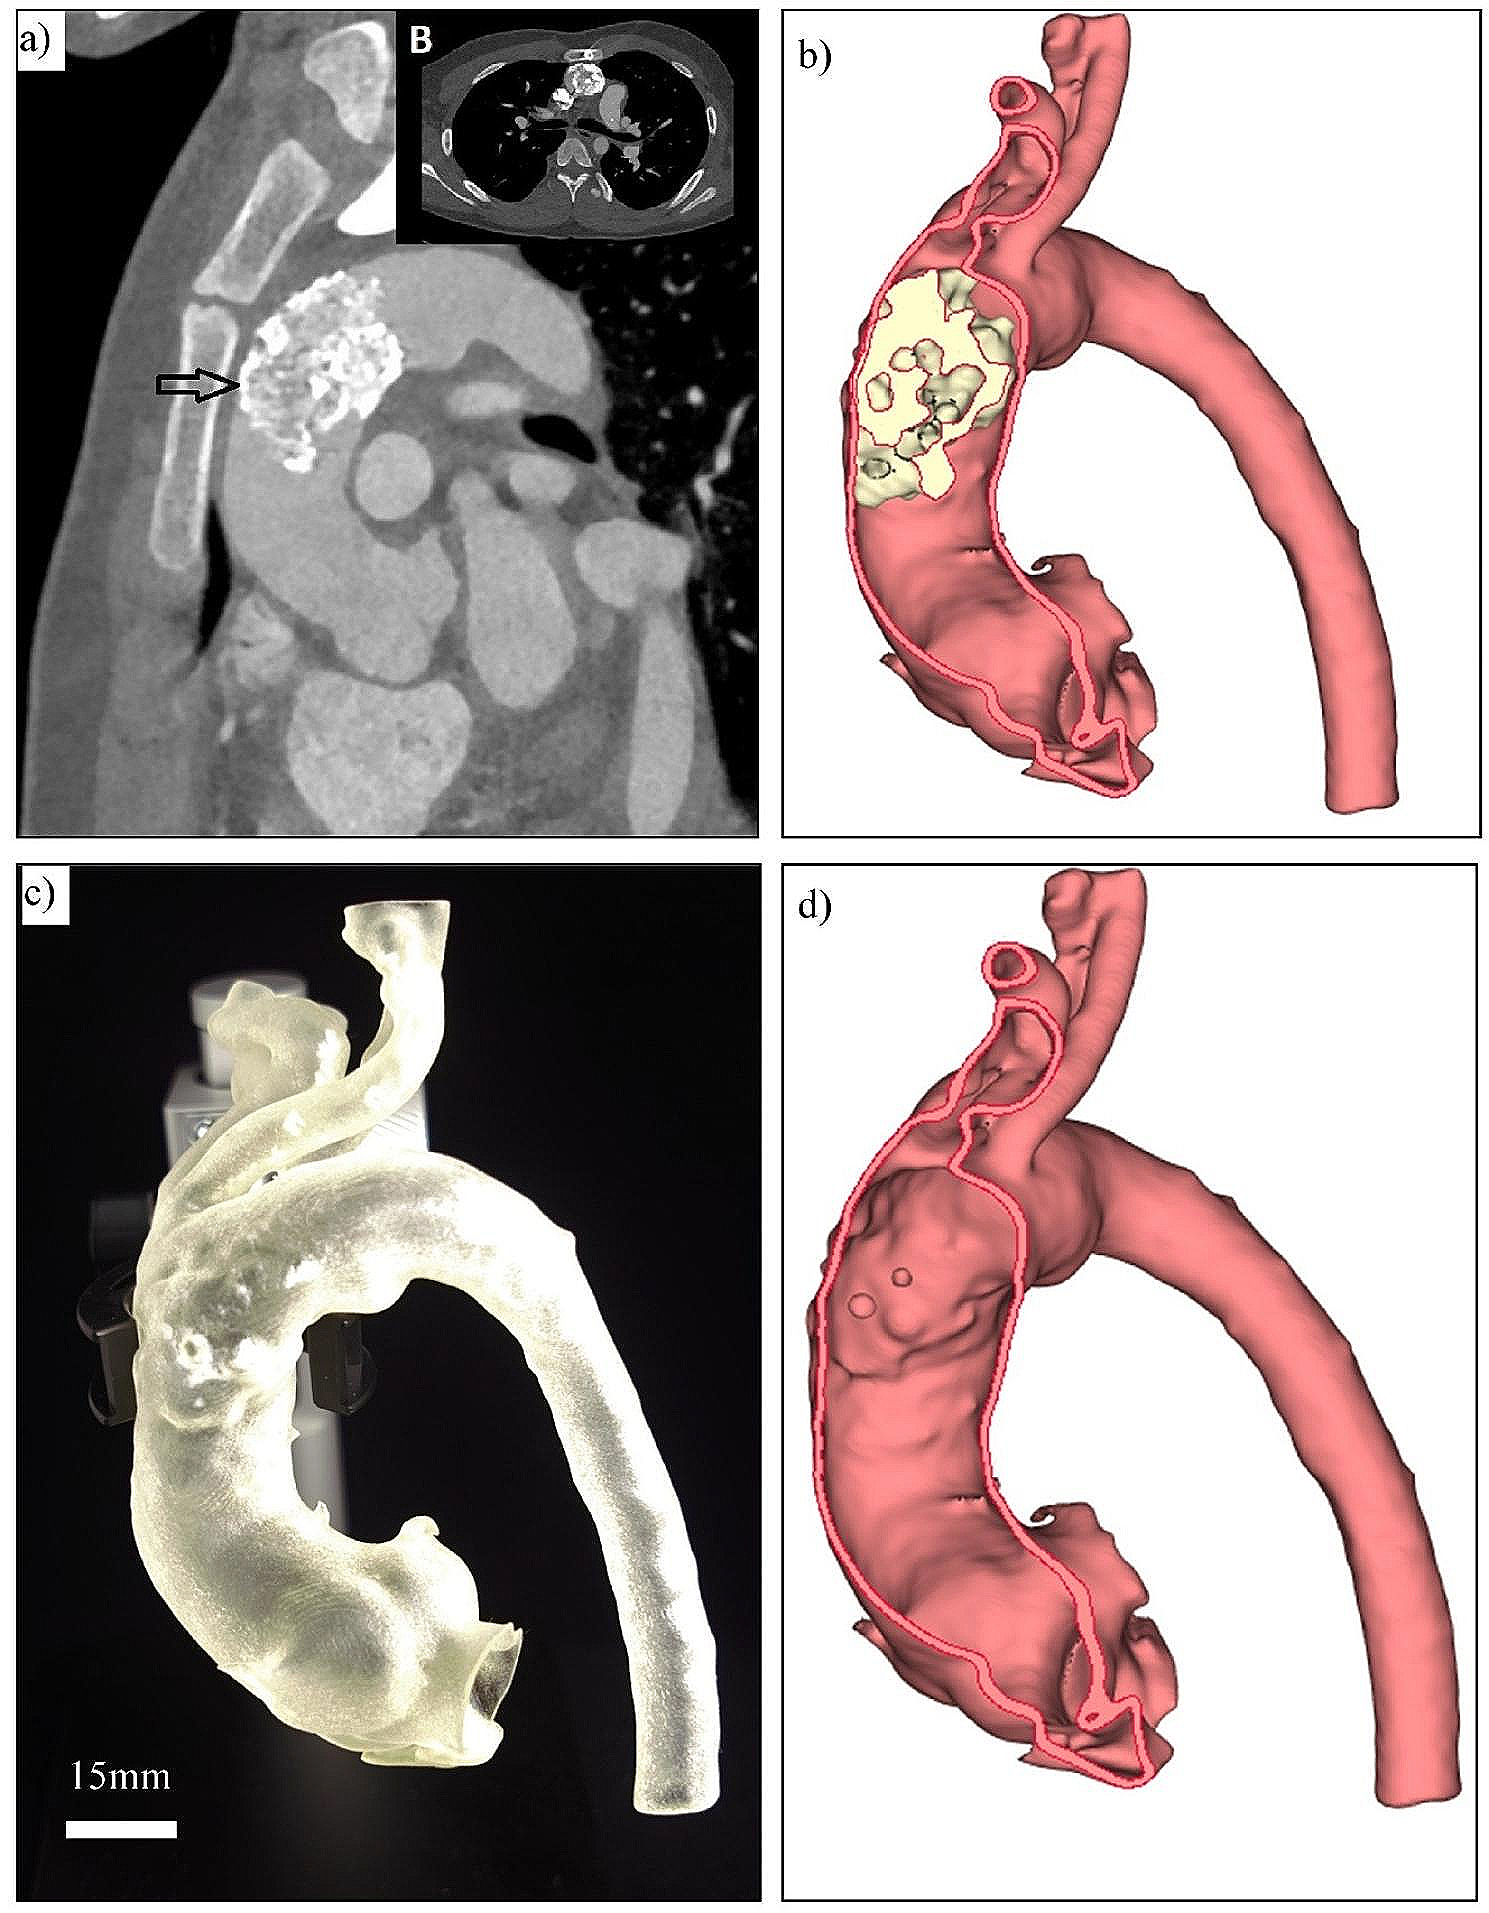 Coral reef aorta: a rare form of obstruction of the ascending aorta in adolescent with aortopathy- case report